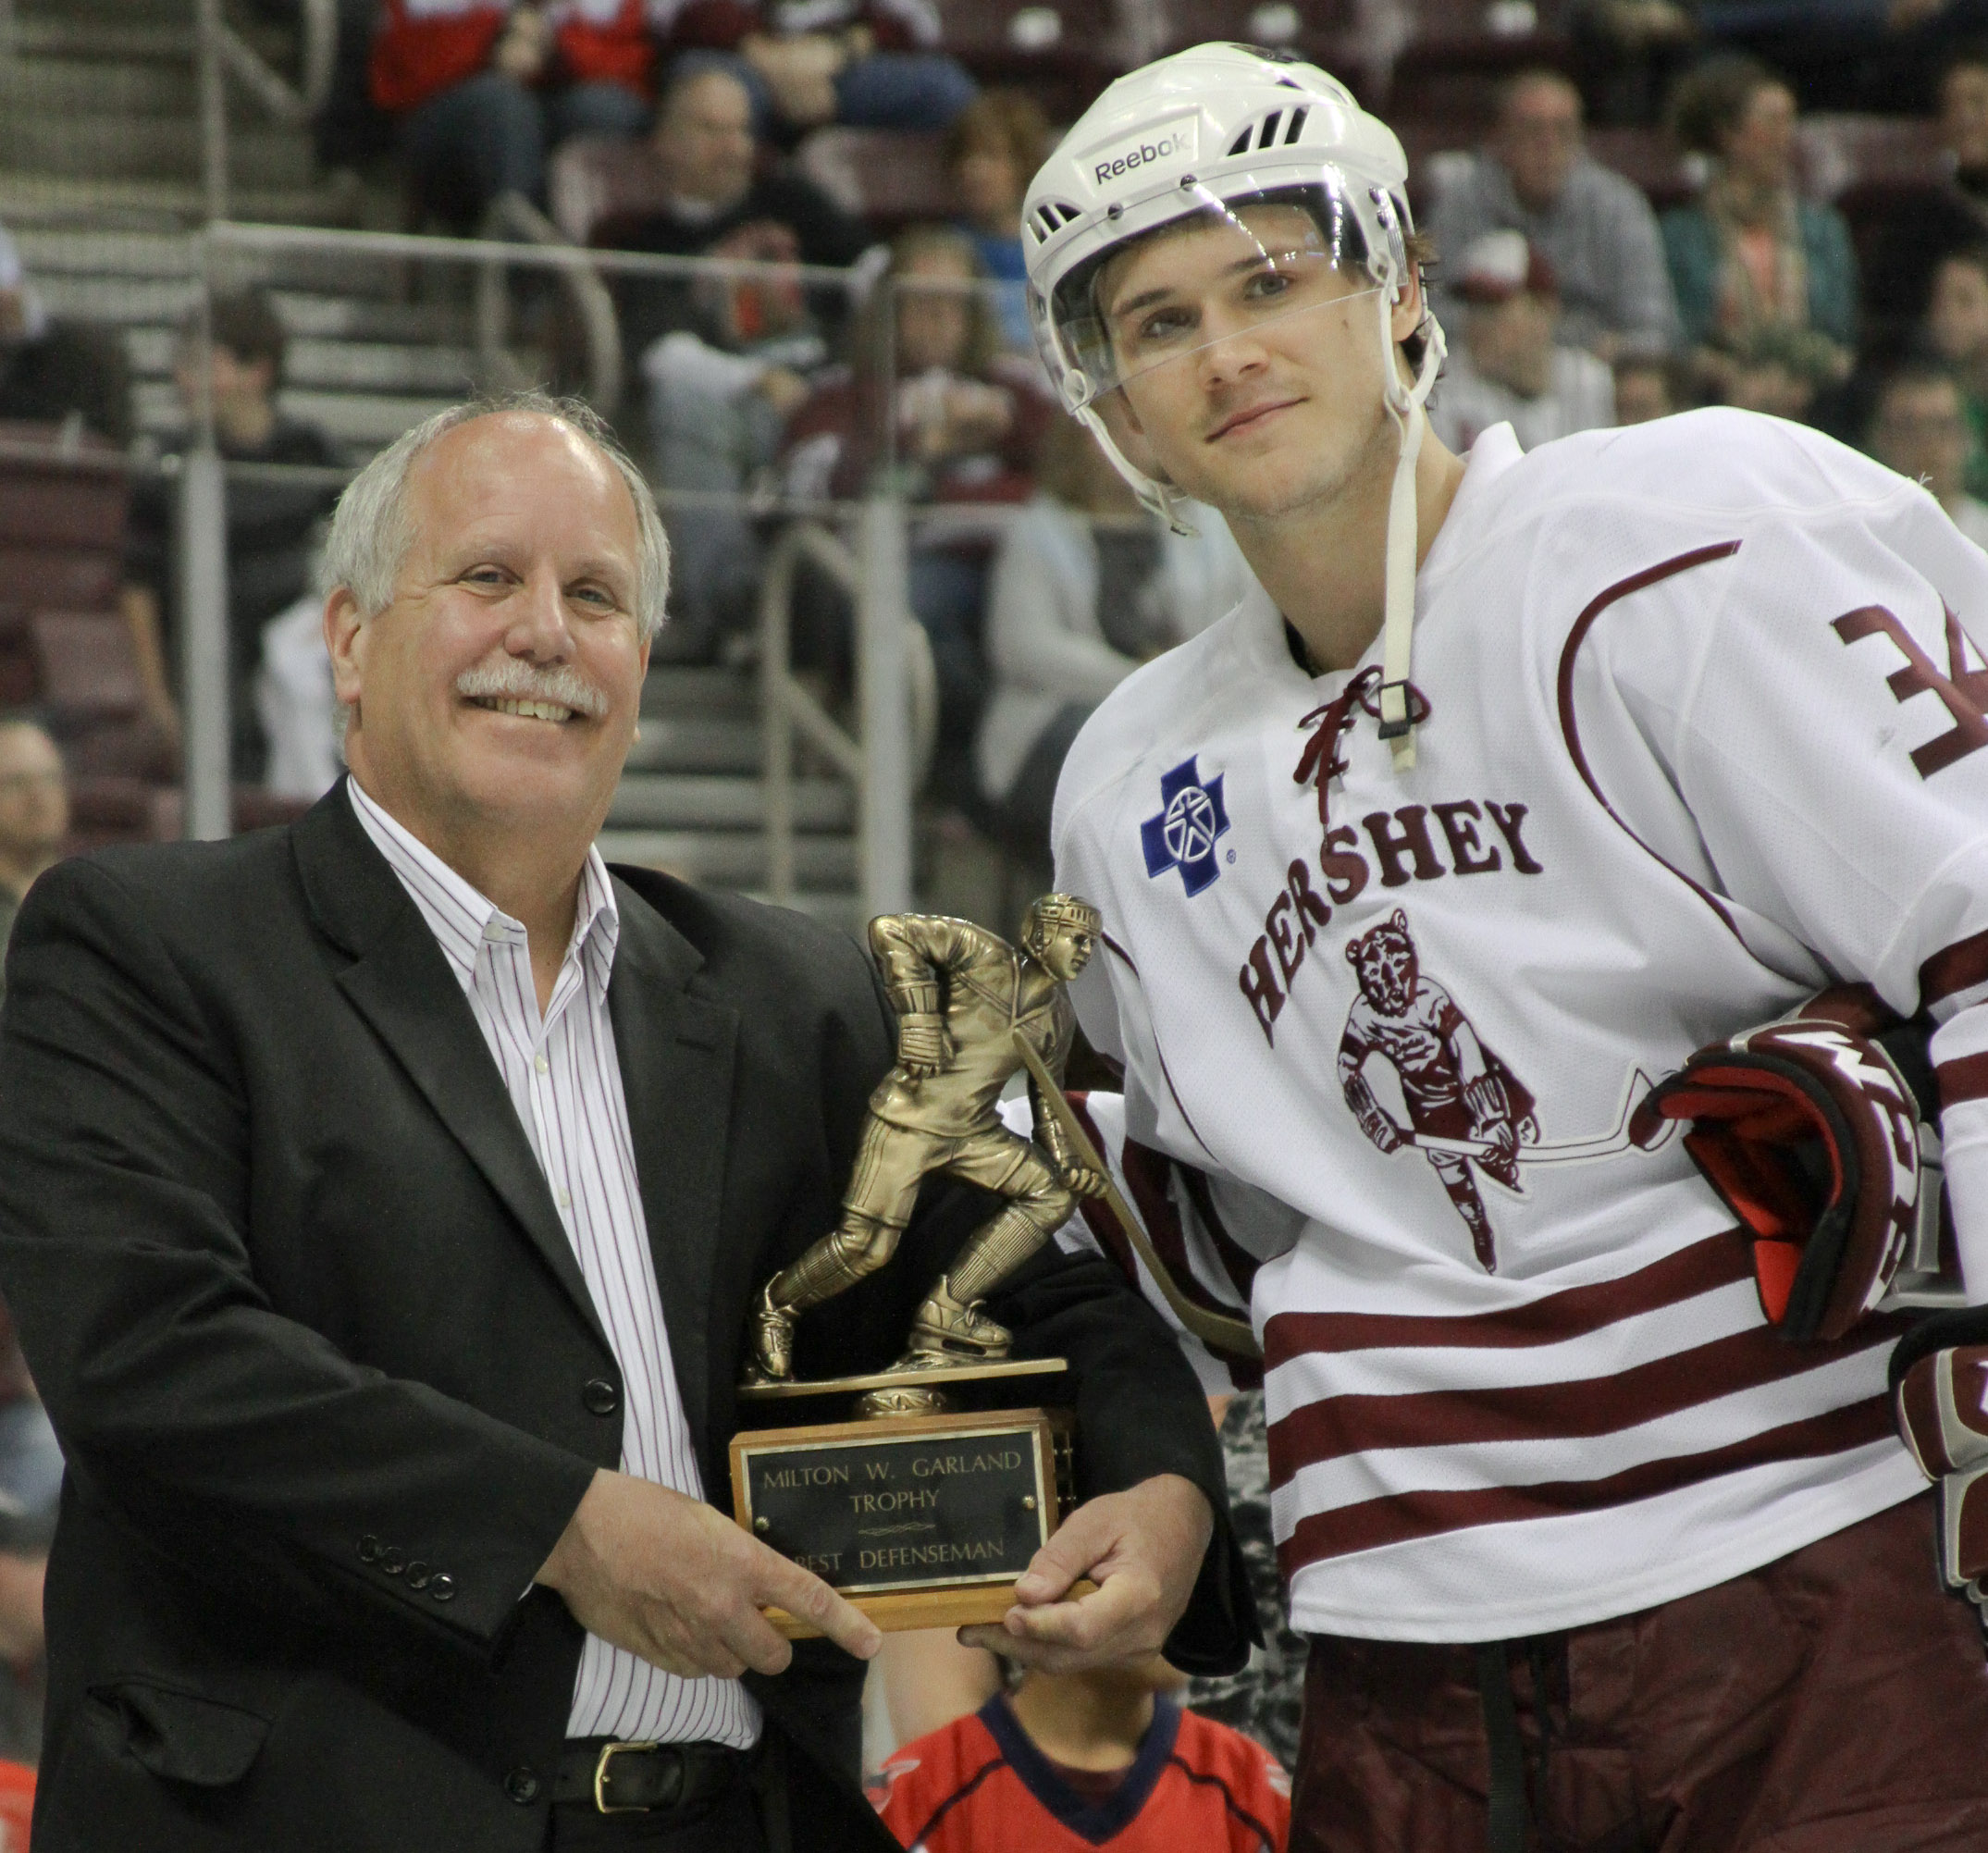 Tomas Kundratek Is Given The Milton W. Garland Trophy For Best Defenseman